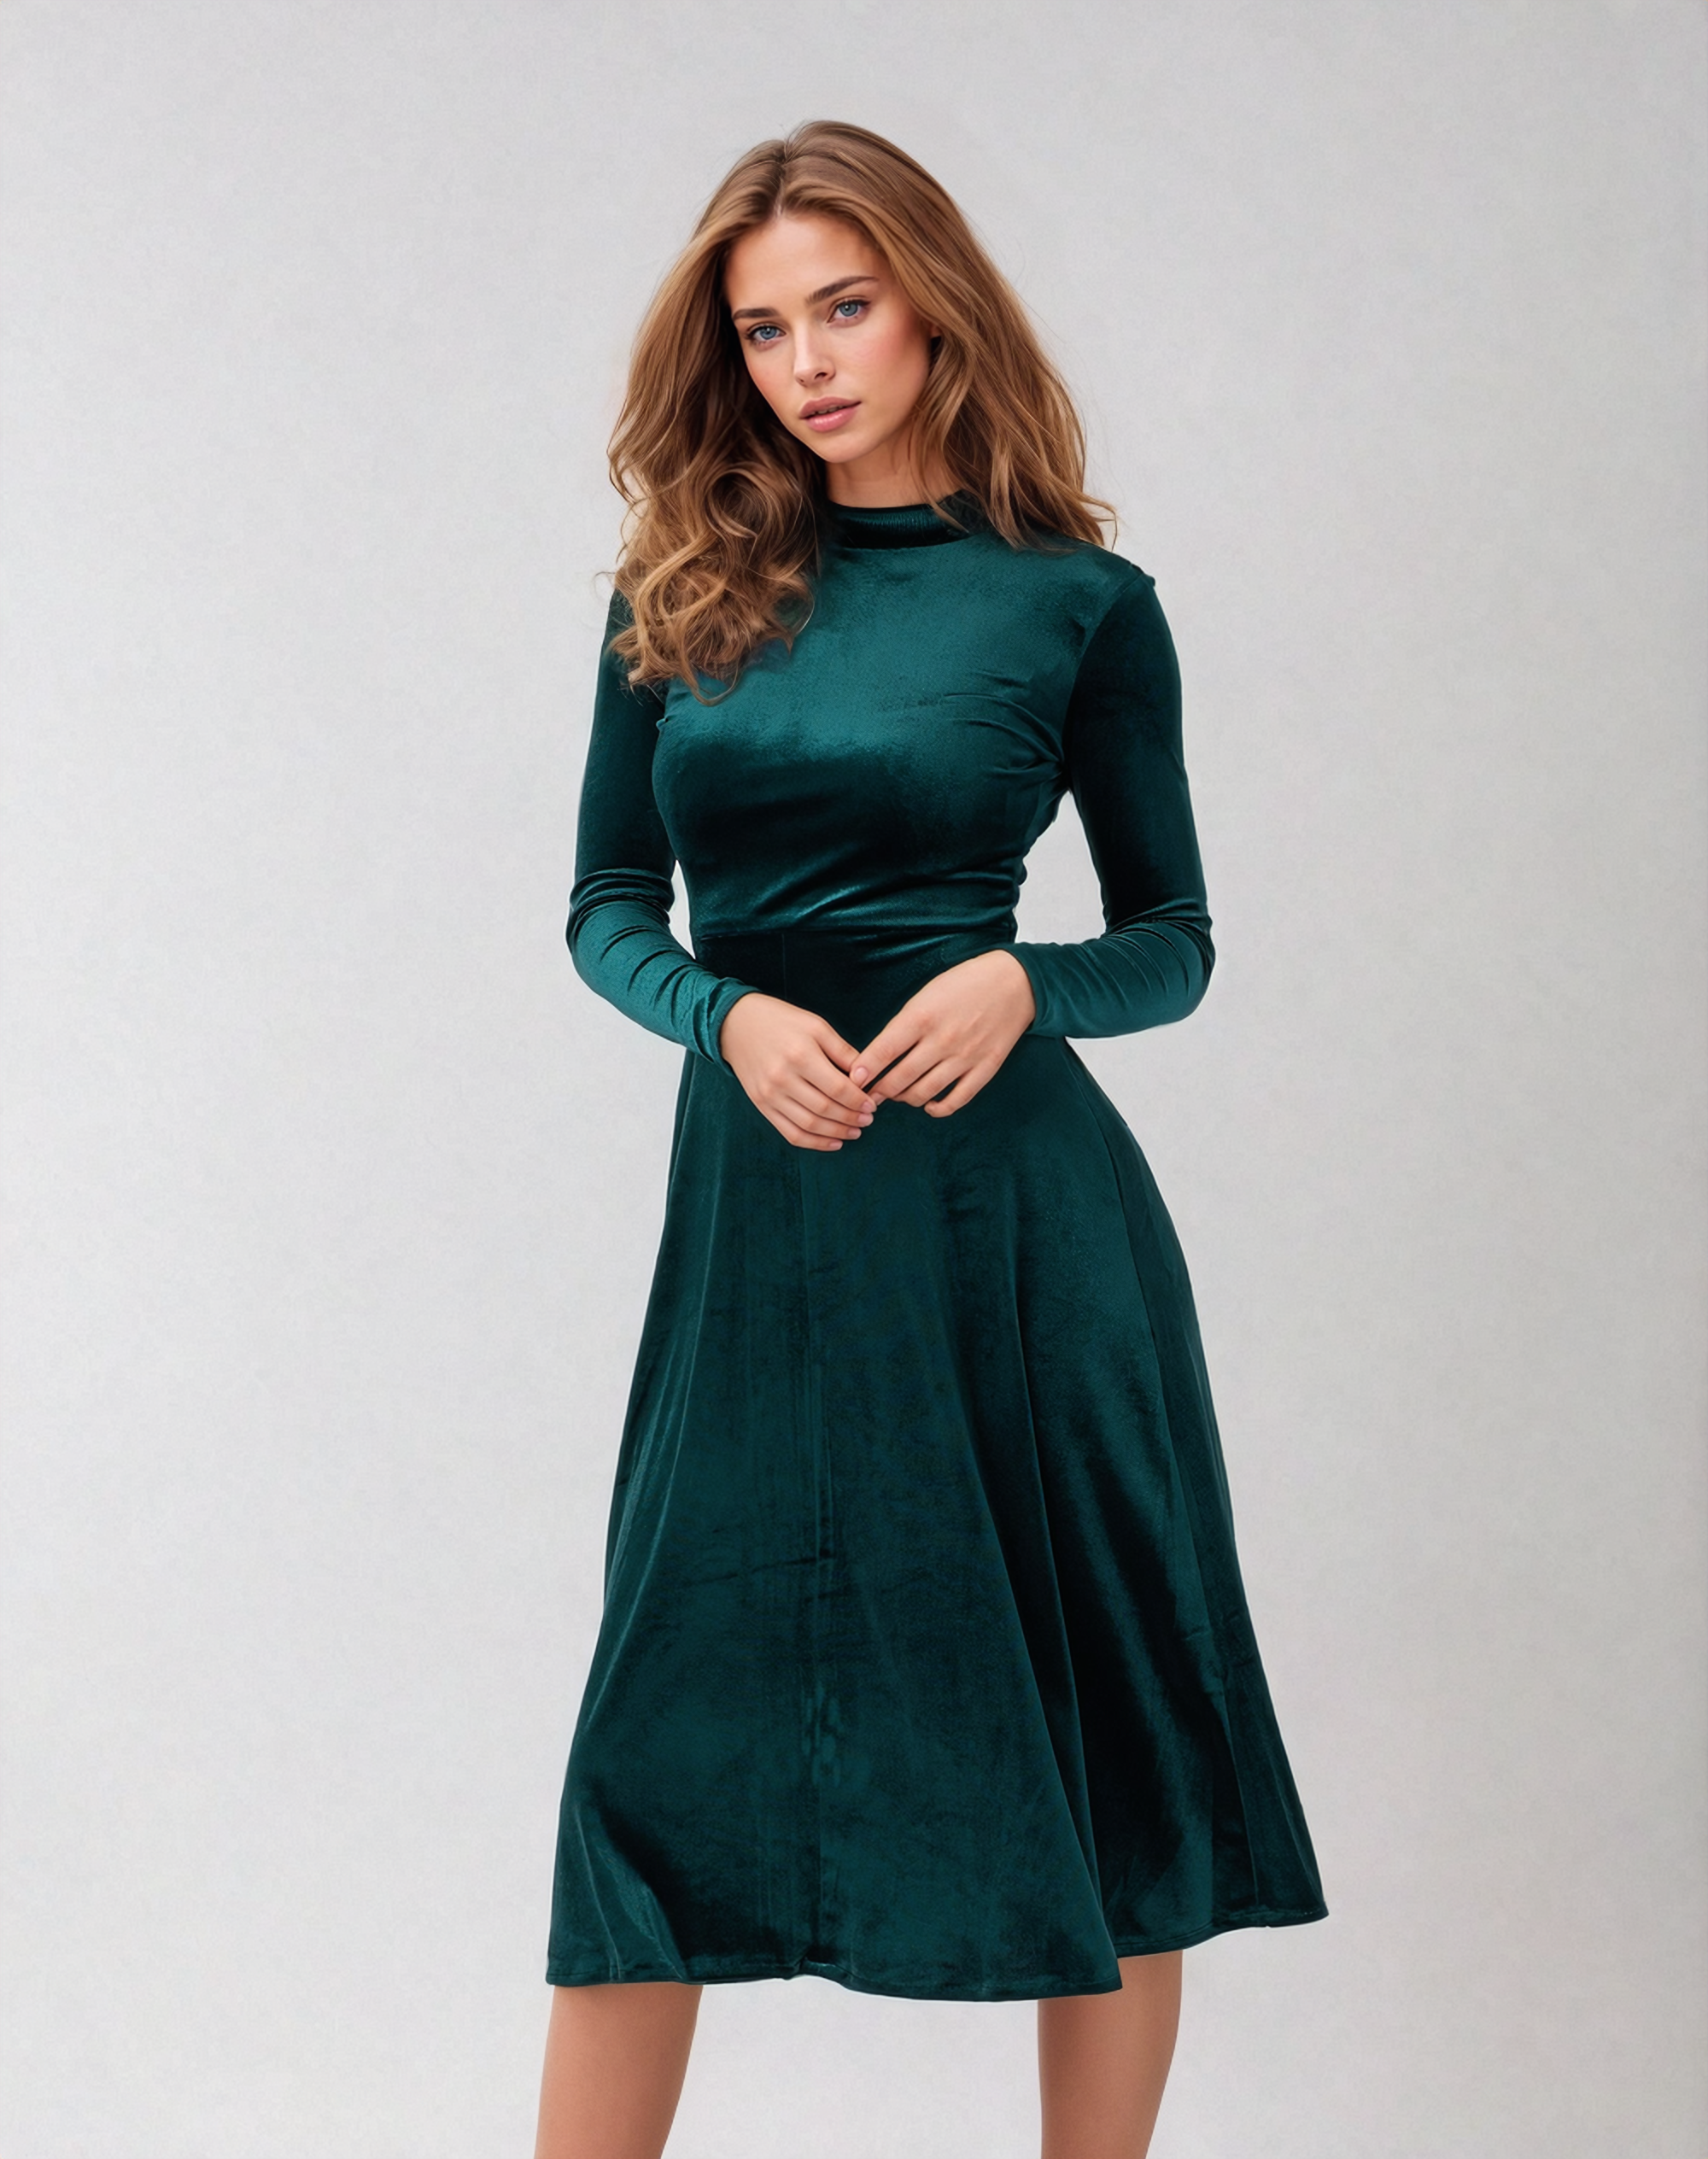 Slim Fit Velvet Dress with intricately Designed Cutout